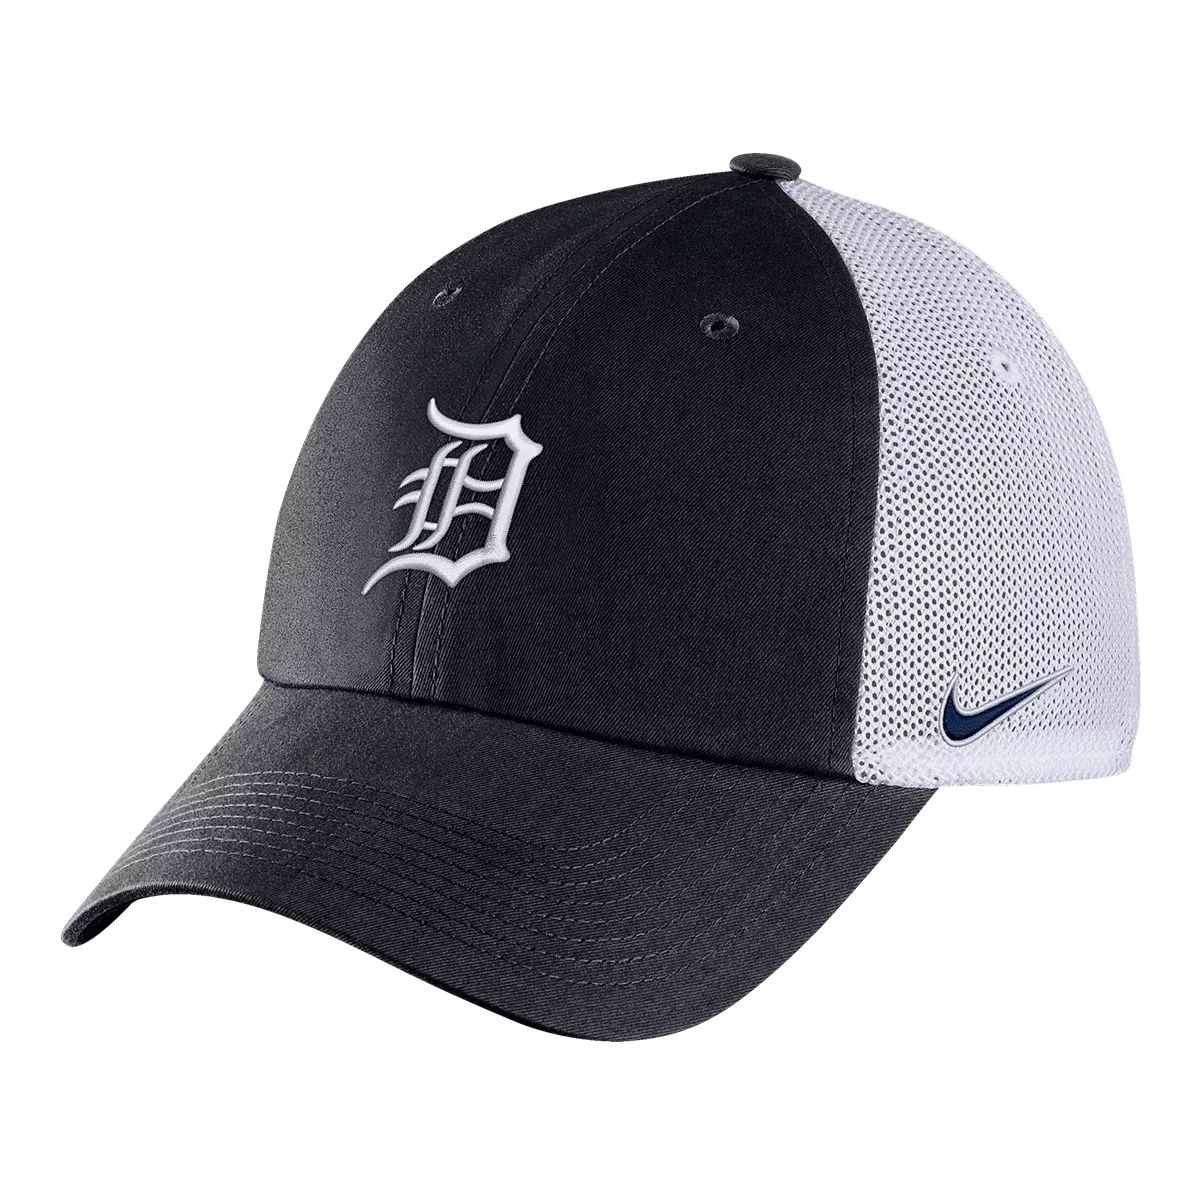 Detroit Tigers MLB Baseball Cap Hat Embroidered Adjustable SIZE YOUTH  eBay